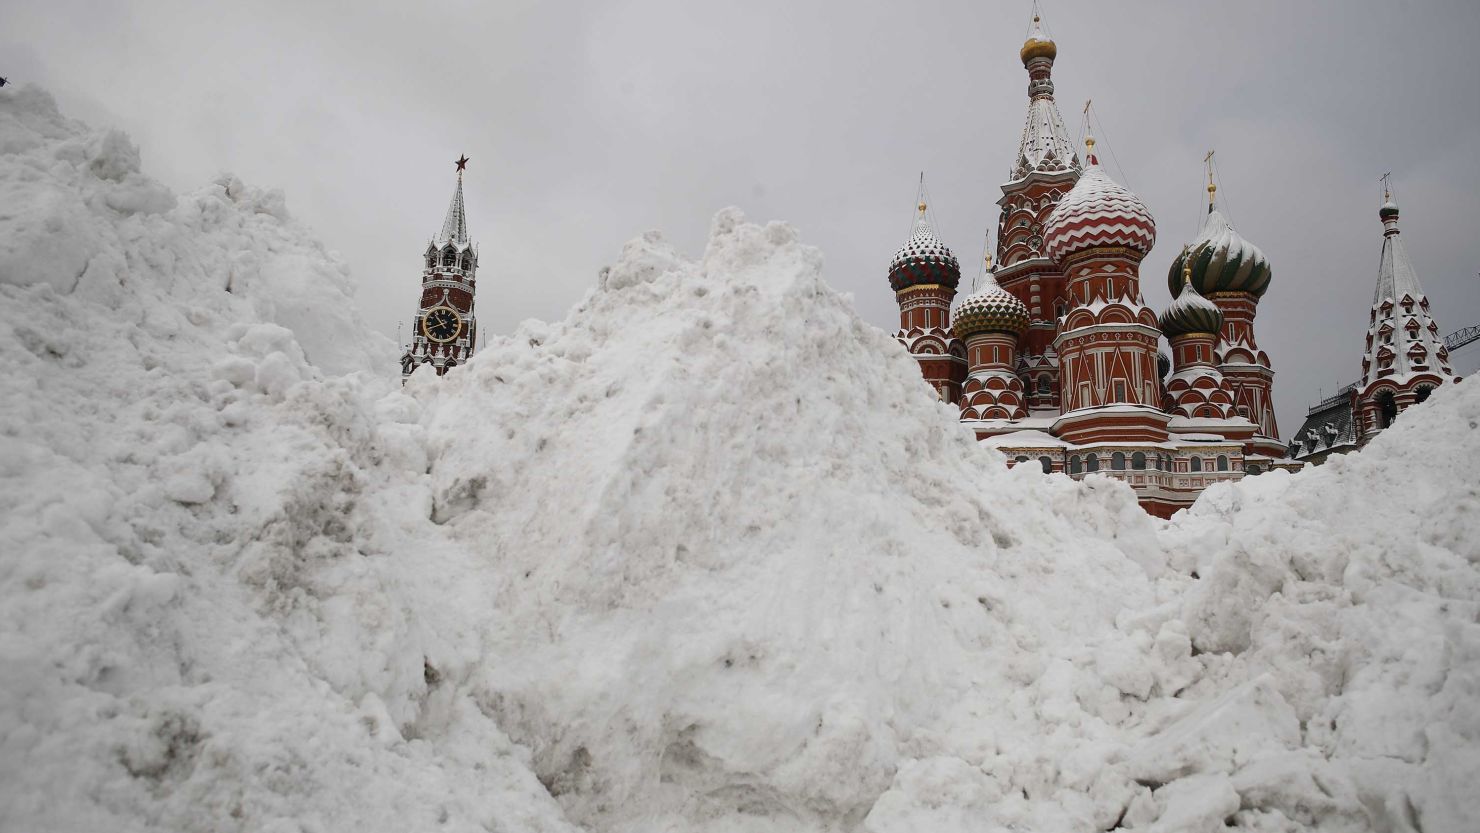 Snow blankets Red Square in Moscow on Monday, February 5, causing delayed flights and power cuts.